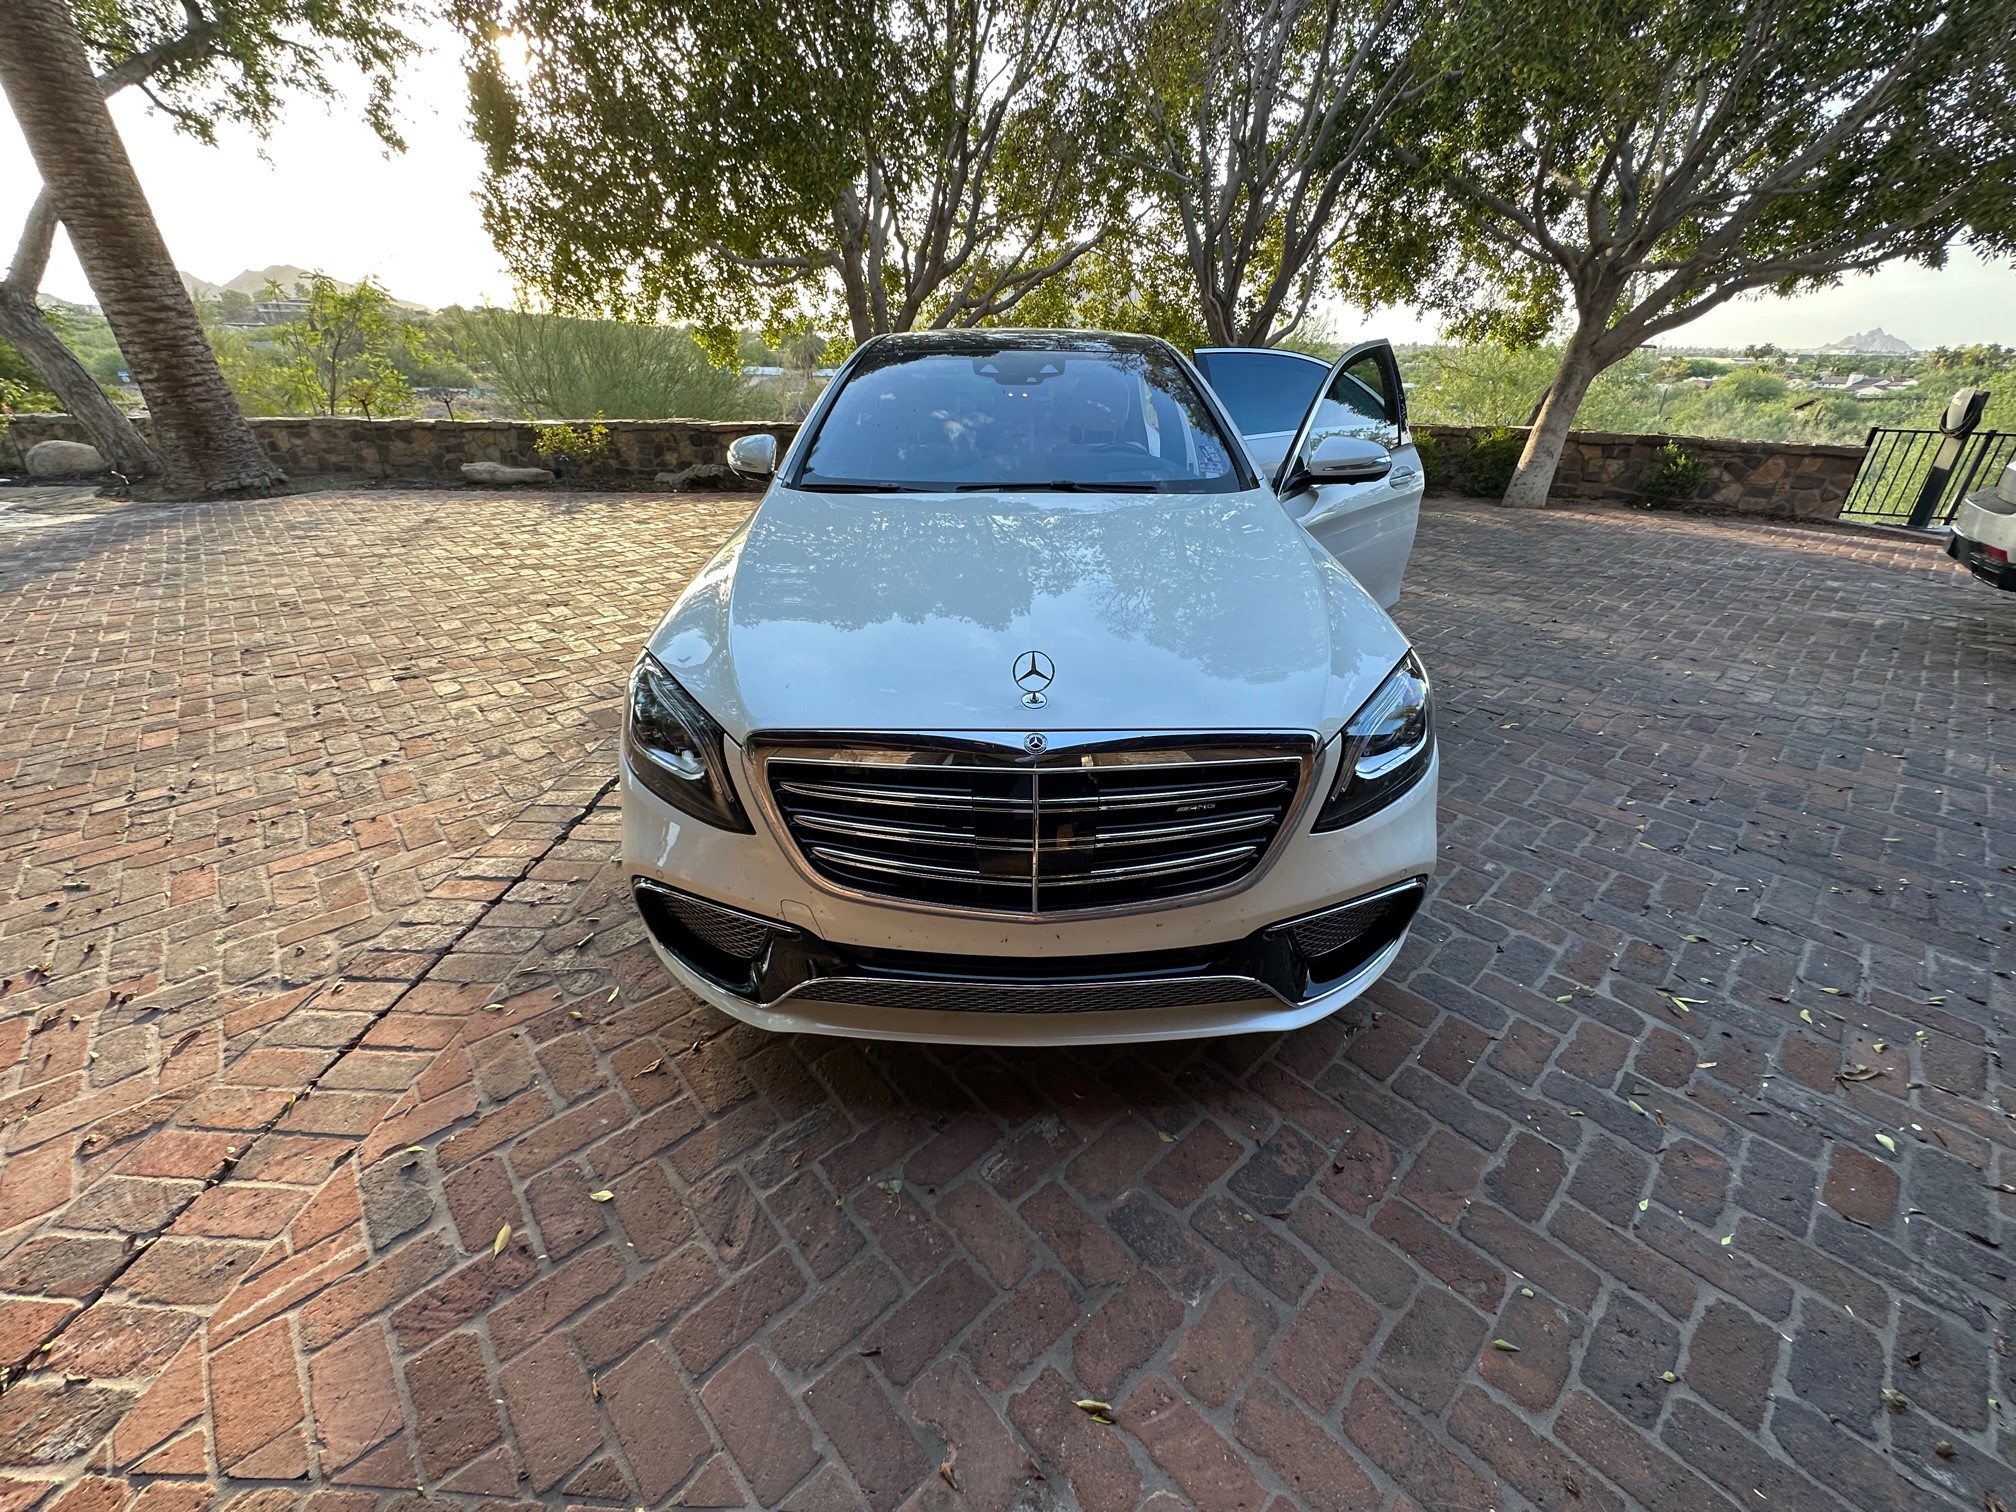 Used 2015 Mercedes-Benz M-Class for Sale in Gilbert, AZ